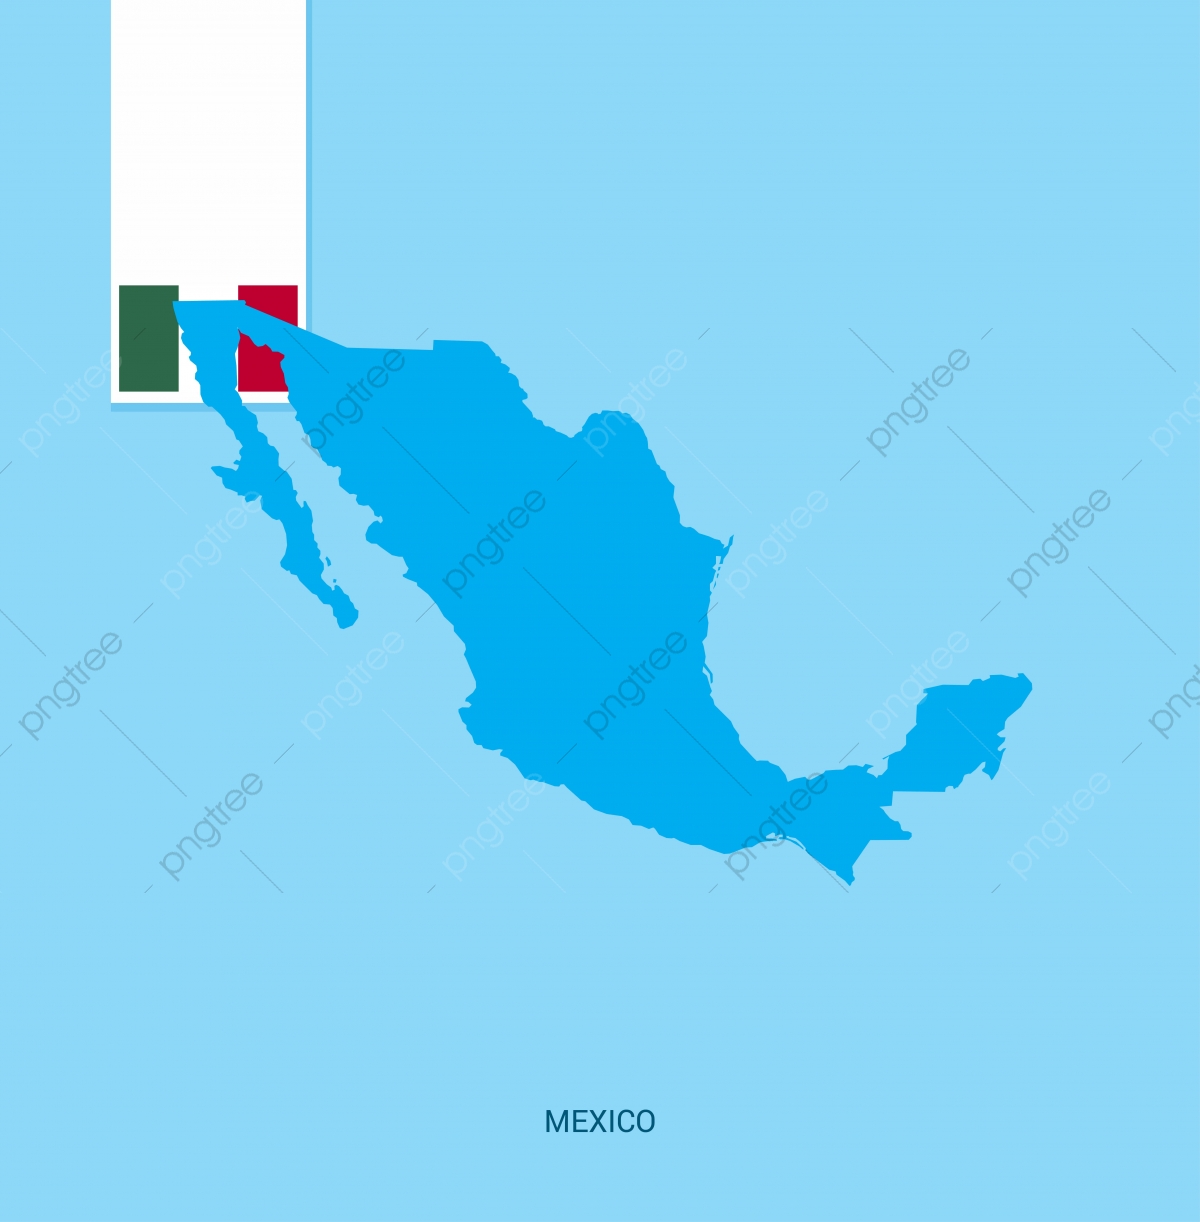 Download Mexico clipart country, Mexico country Transparent FREE ...